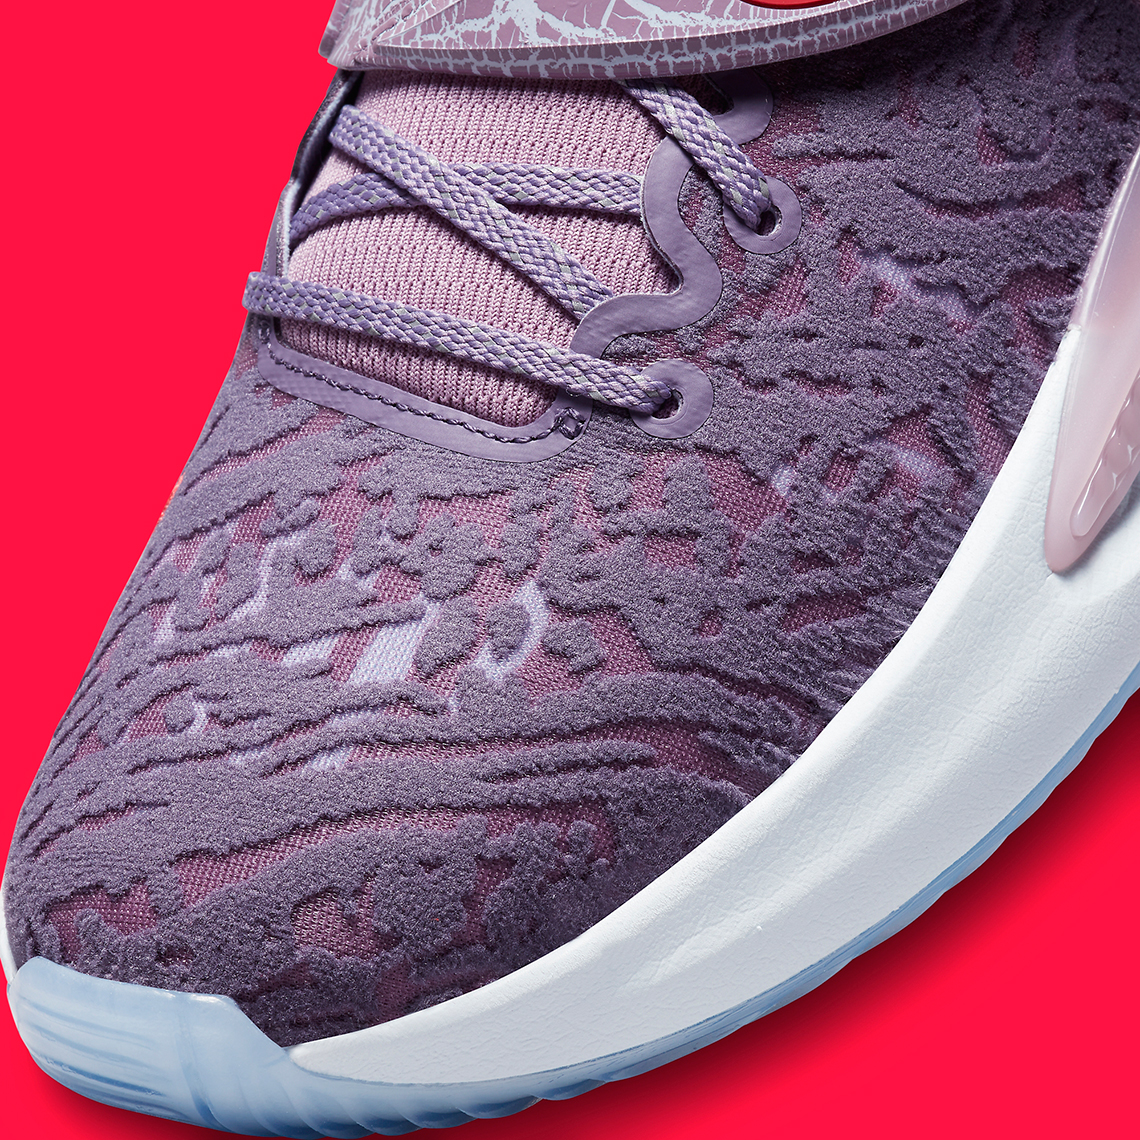 Nike Kd 14 Valentines Day Release Date 10